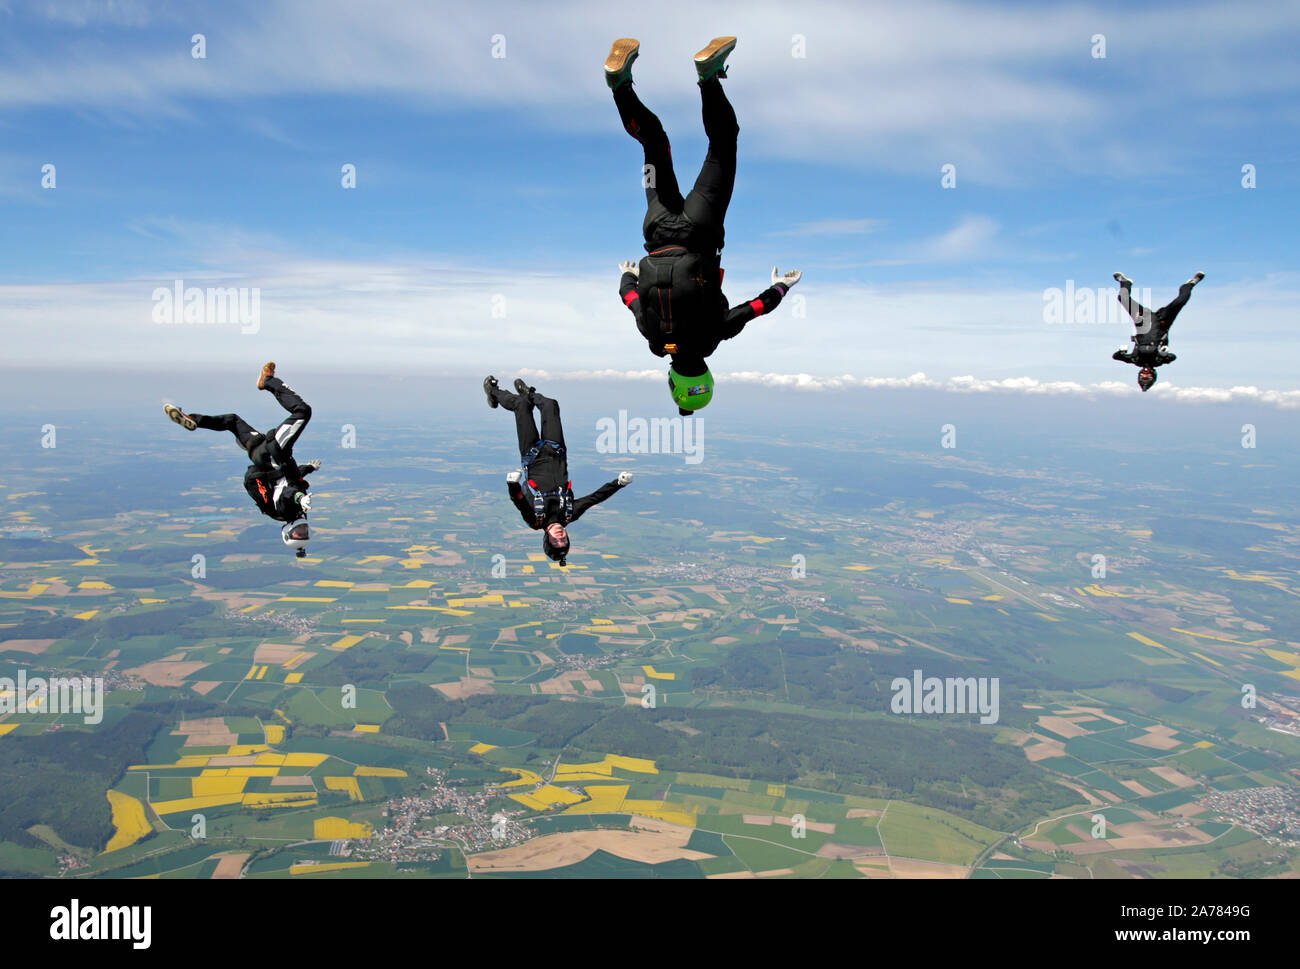 Four skydivers are trying to fly togehter in a formation with a speed of over 120mph. However they are tracking around each other and having fun! Stock Photo